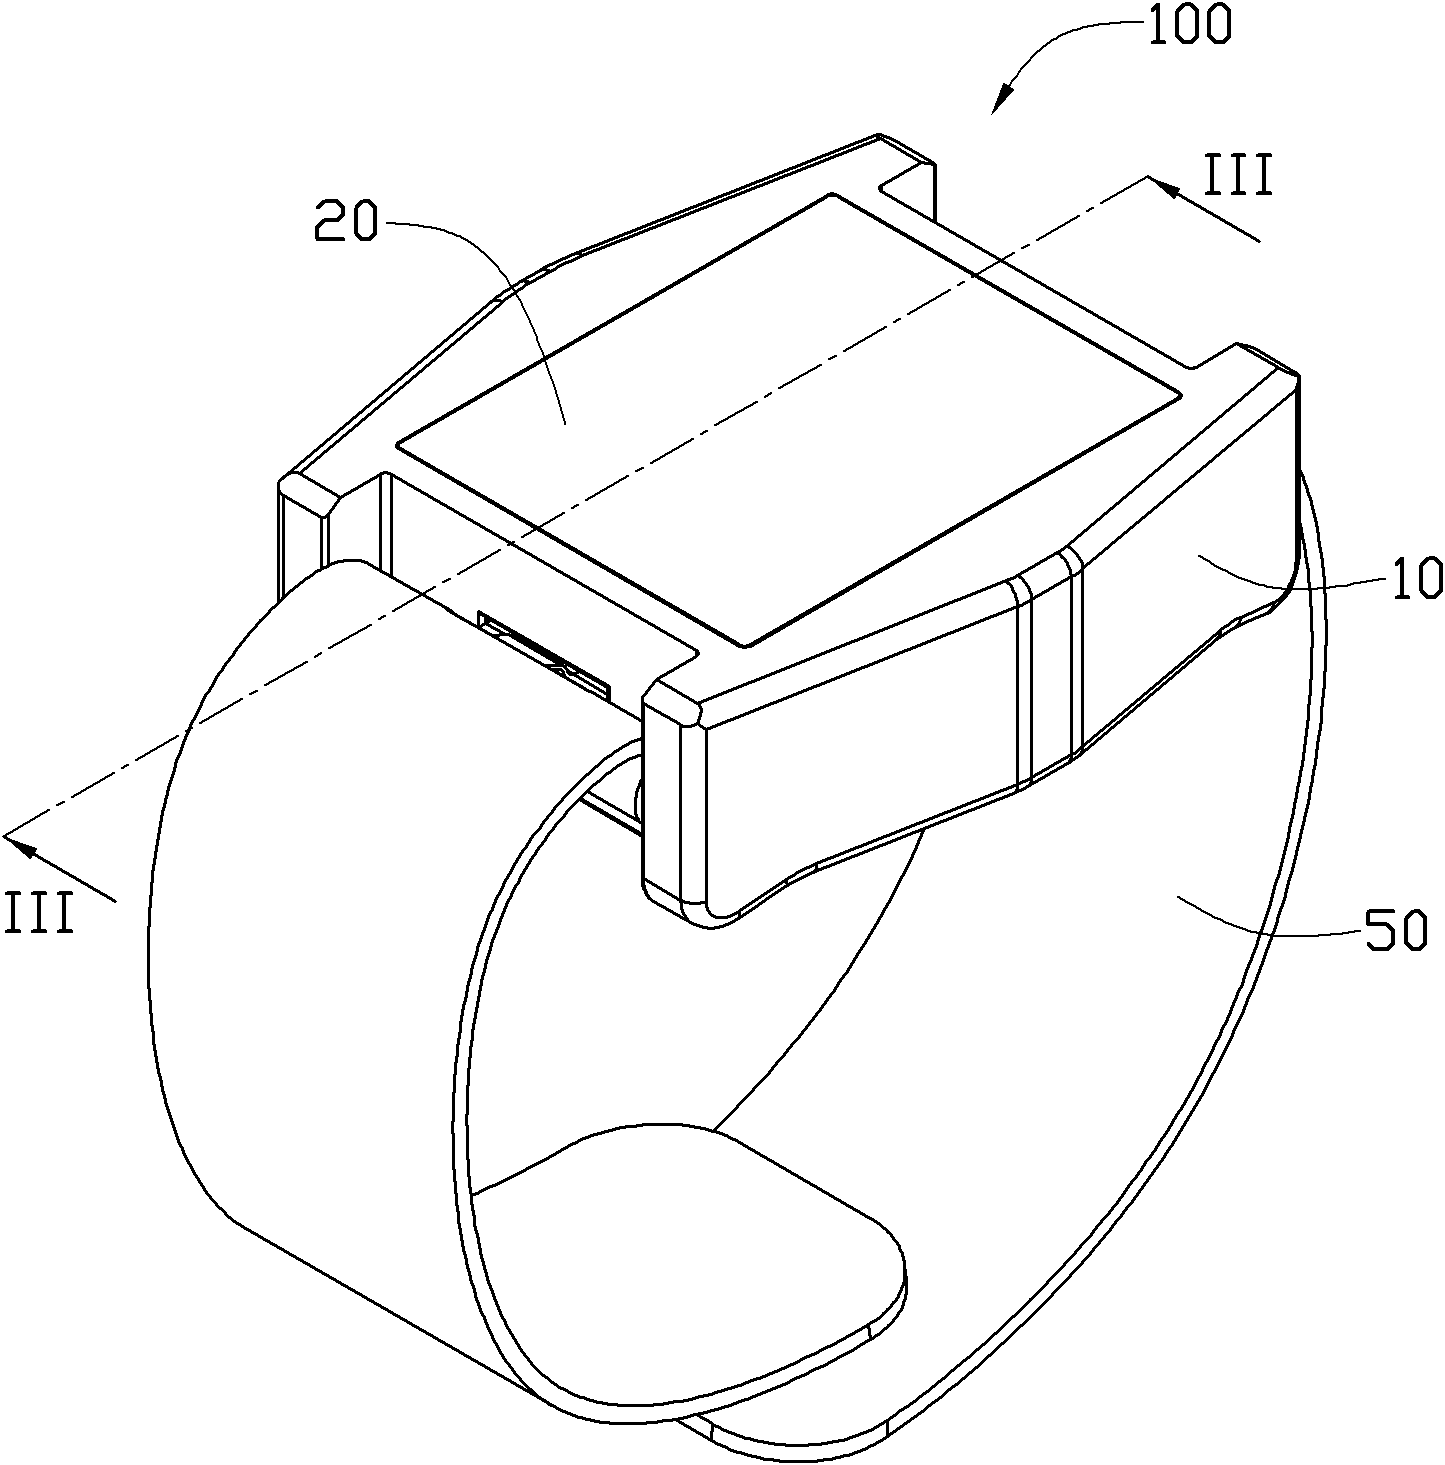 Wrist type electronic device with antenna